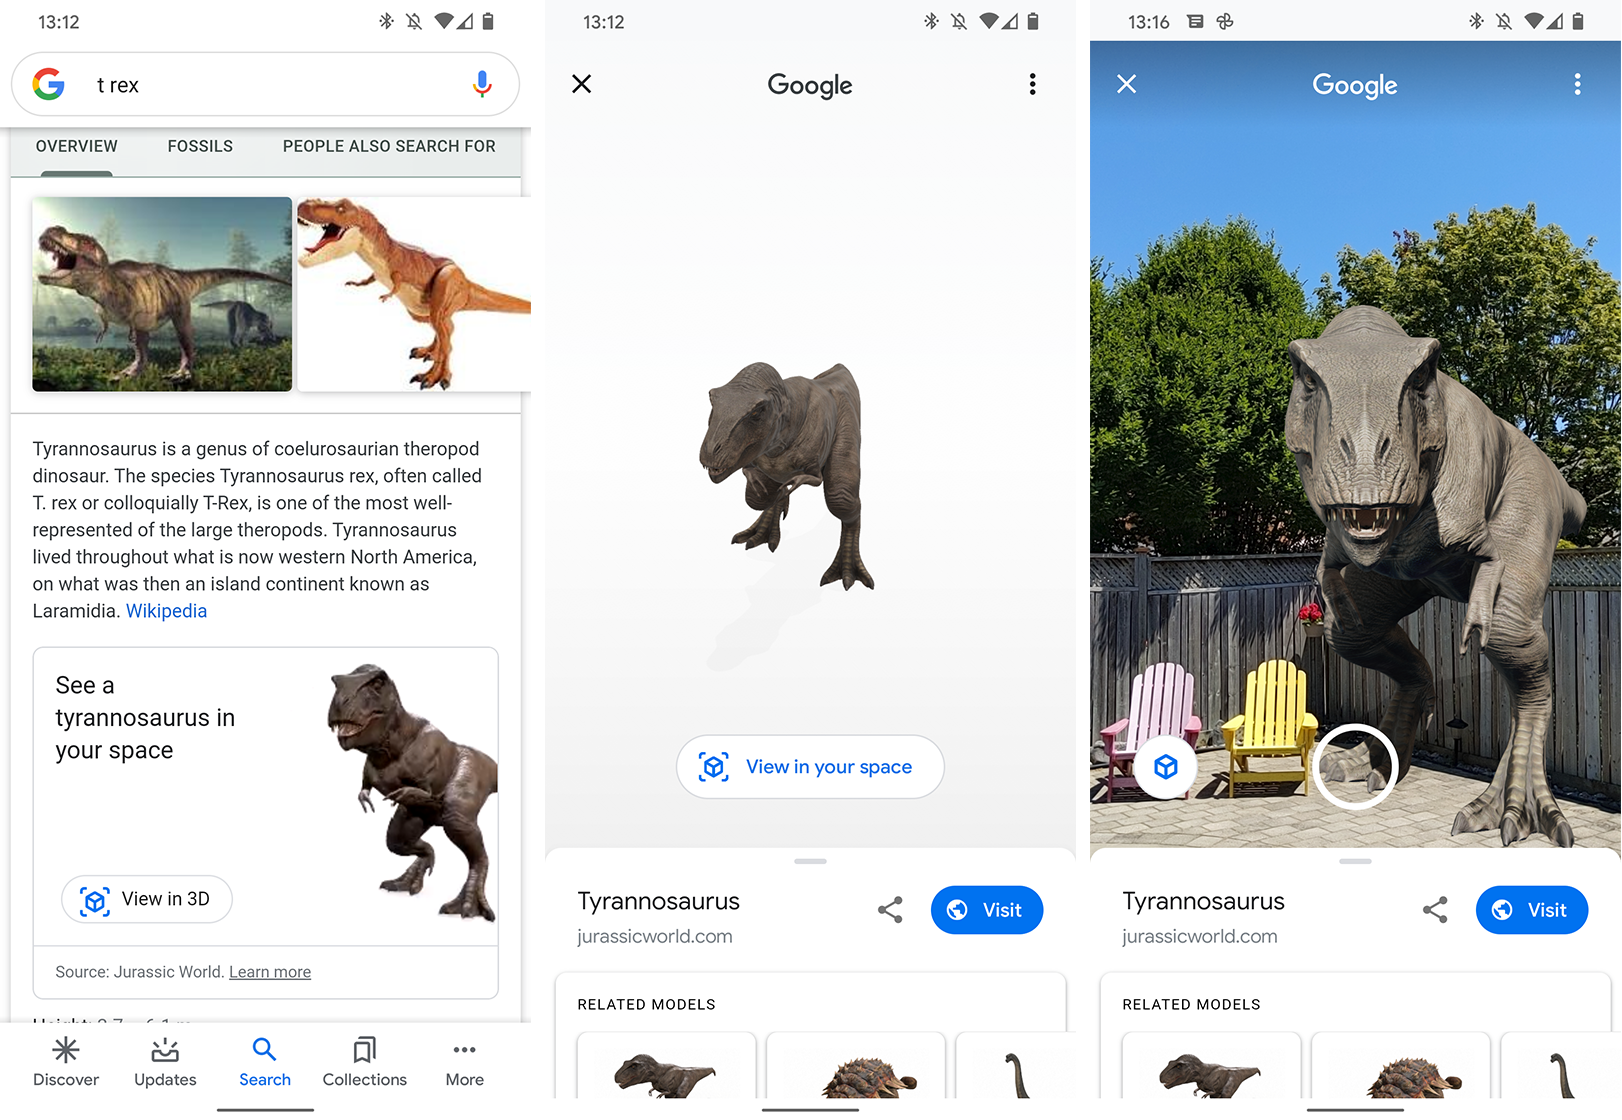 Here are all the critters and objects you can view in AR through Google